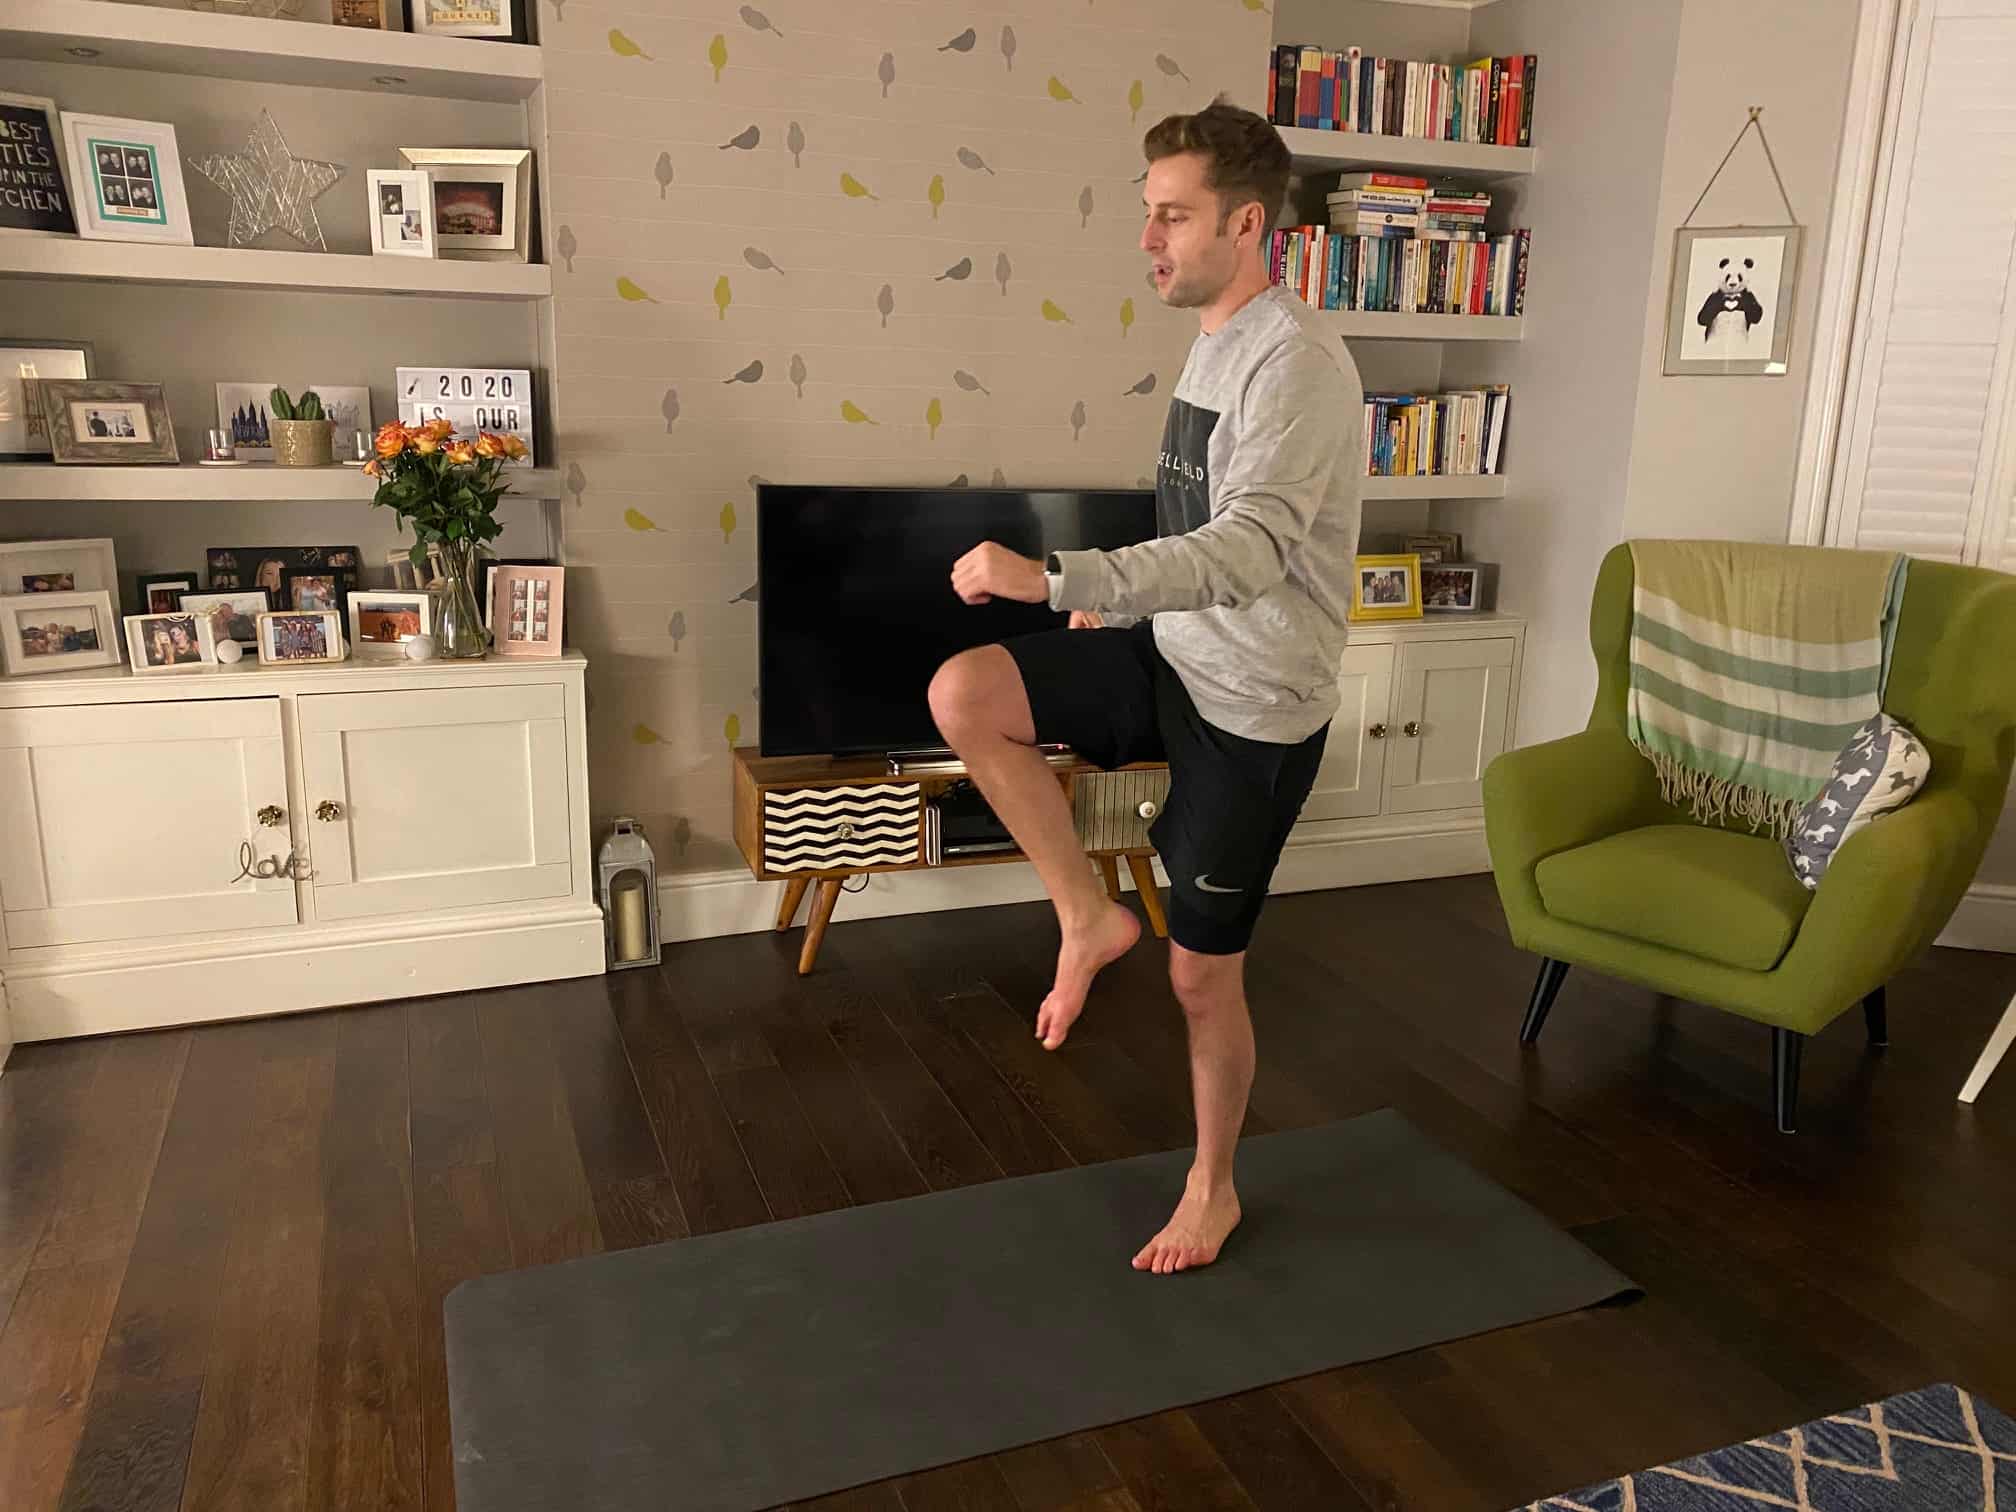 Insta-Fit – The WFH workouts you should know about